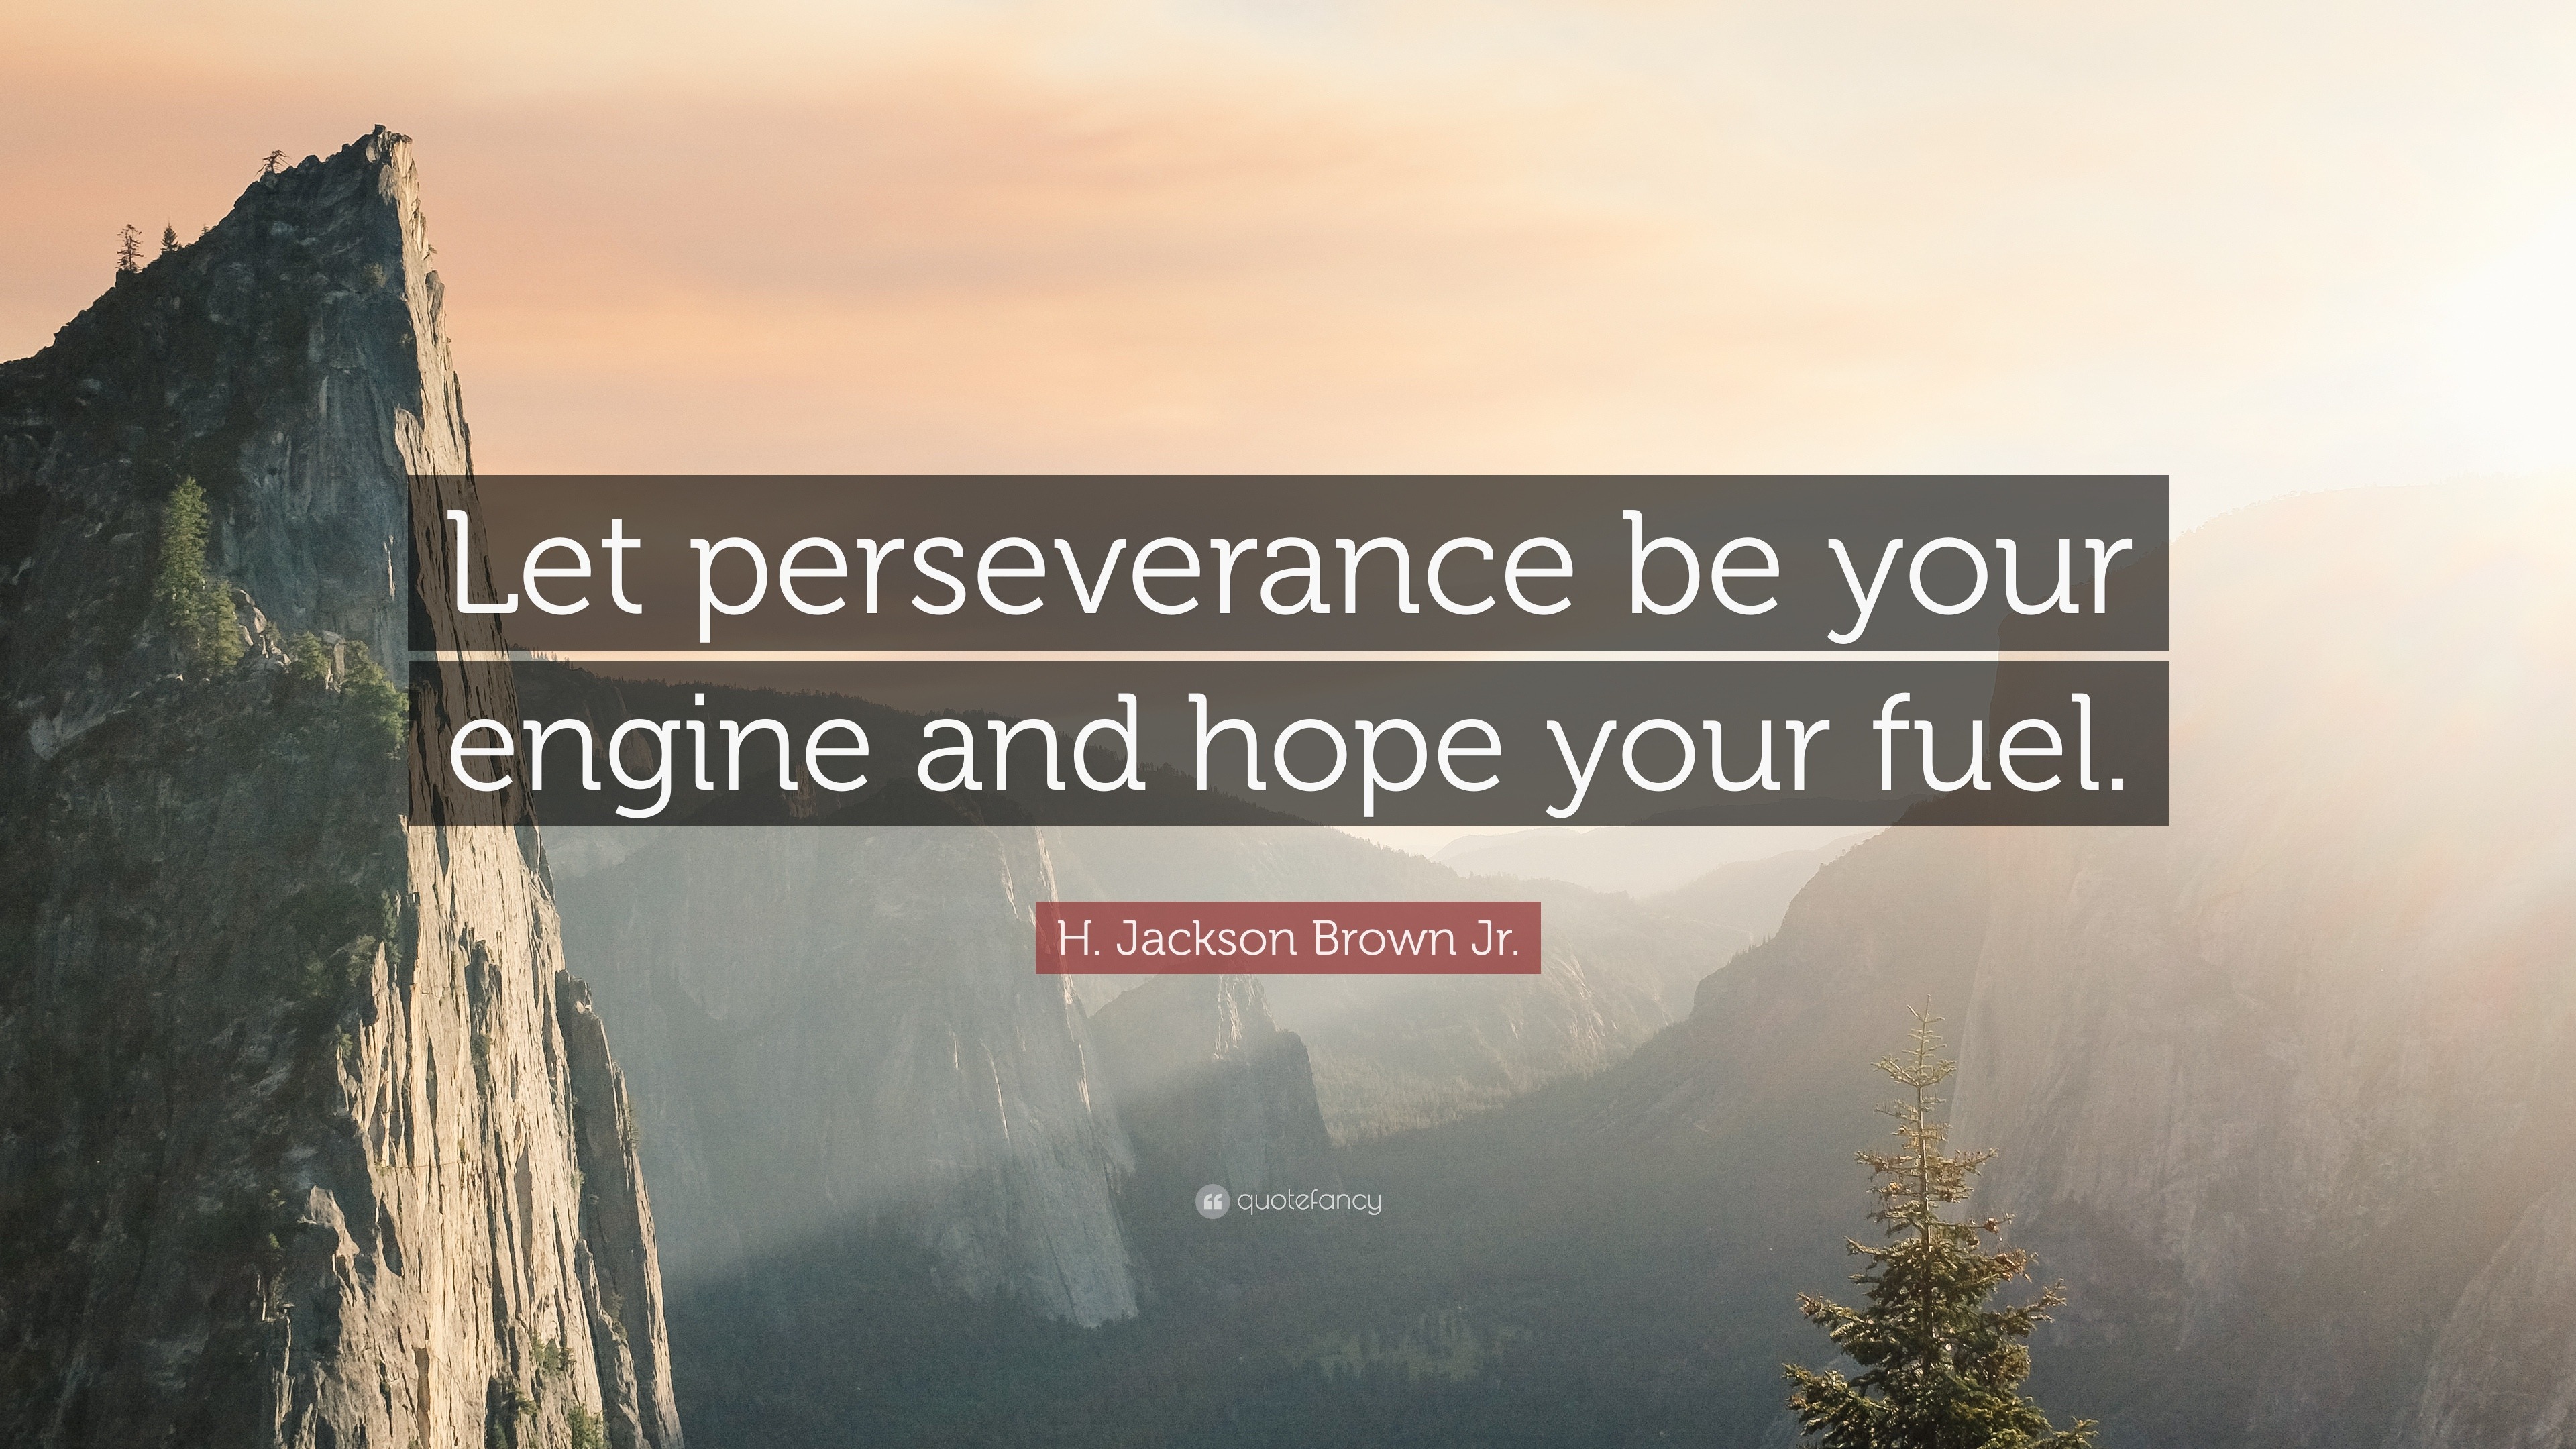 Perseverance Quotes / Perseverance Quotes Famous Persistence Quotations